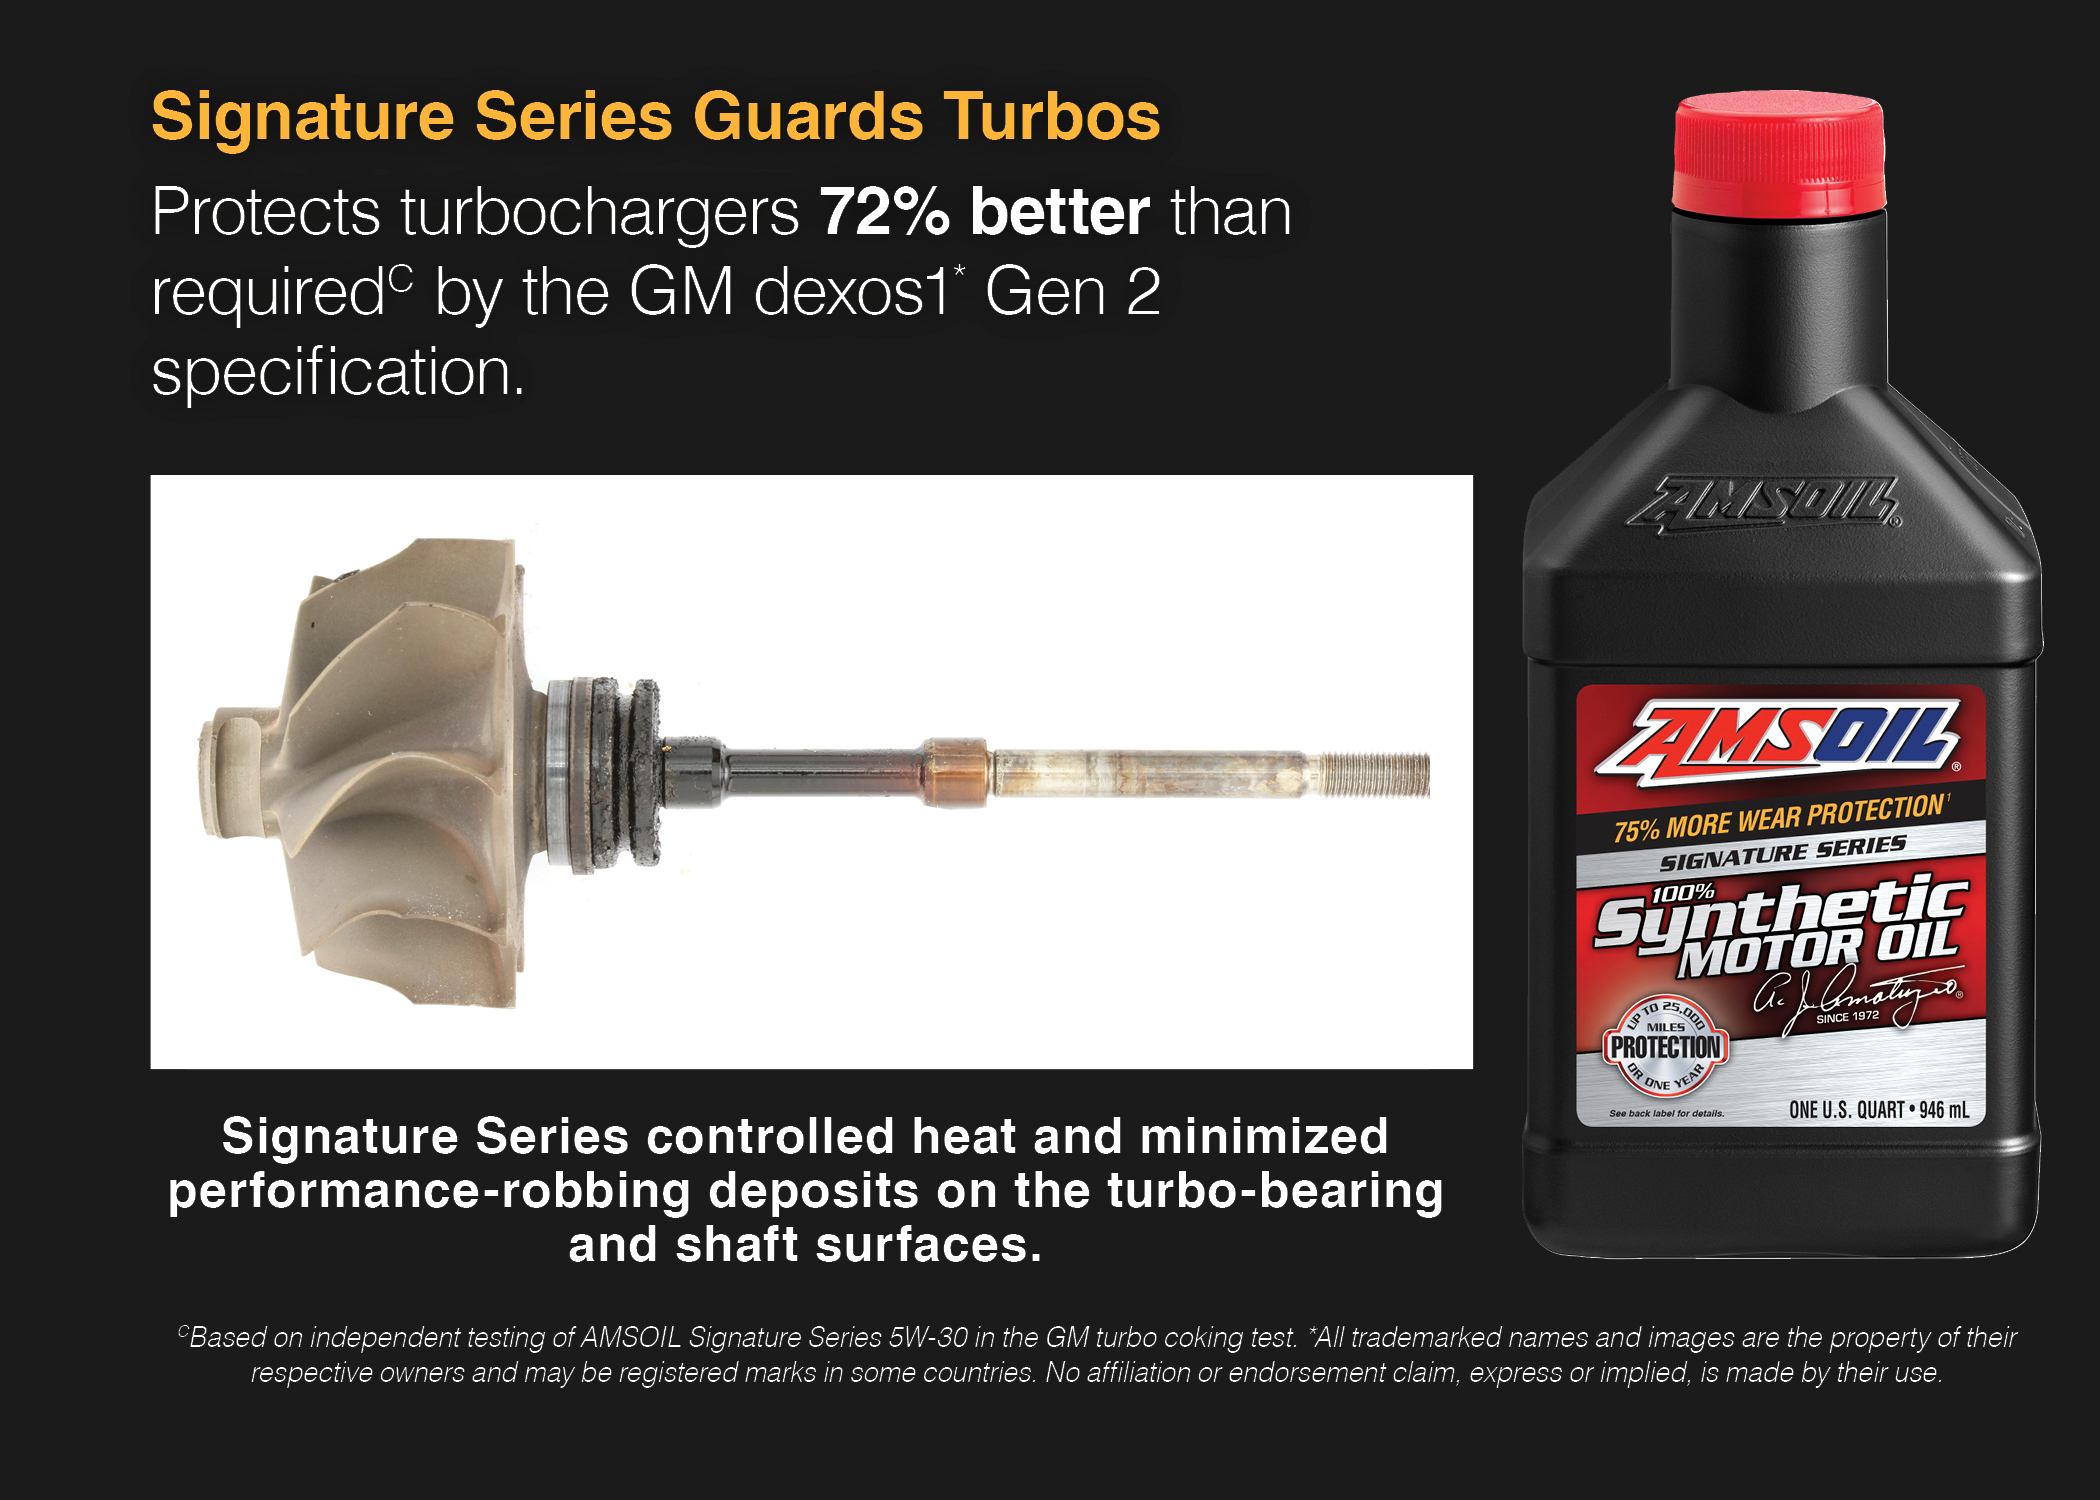 AMSOIL Signature Series protects against turbo coking.